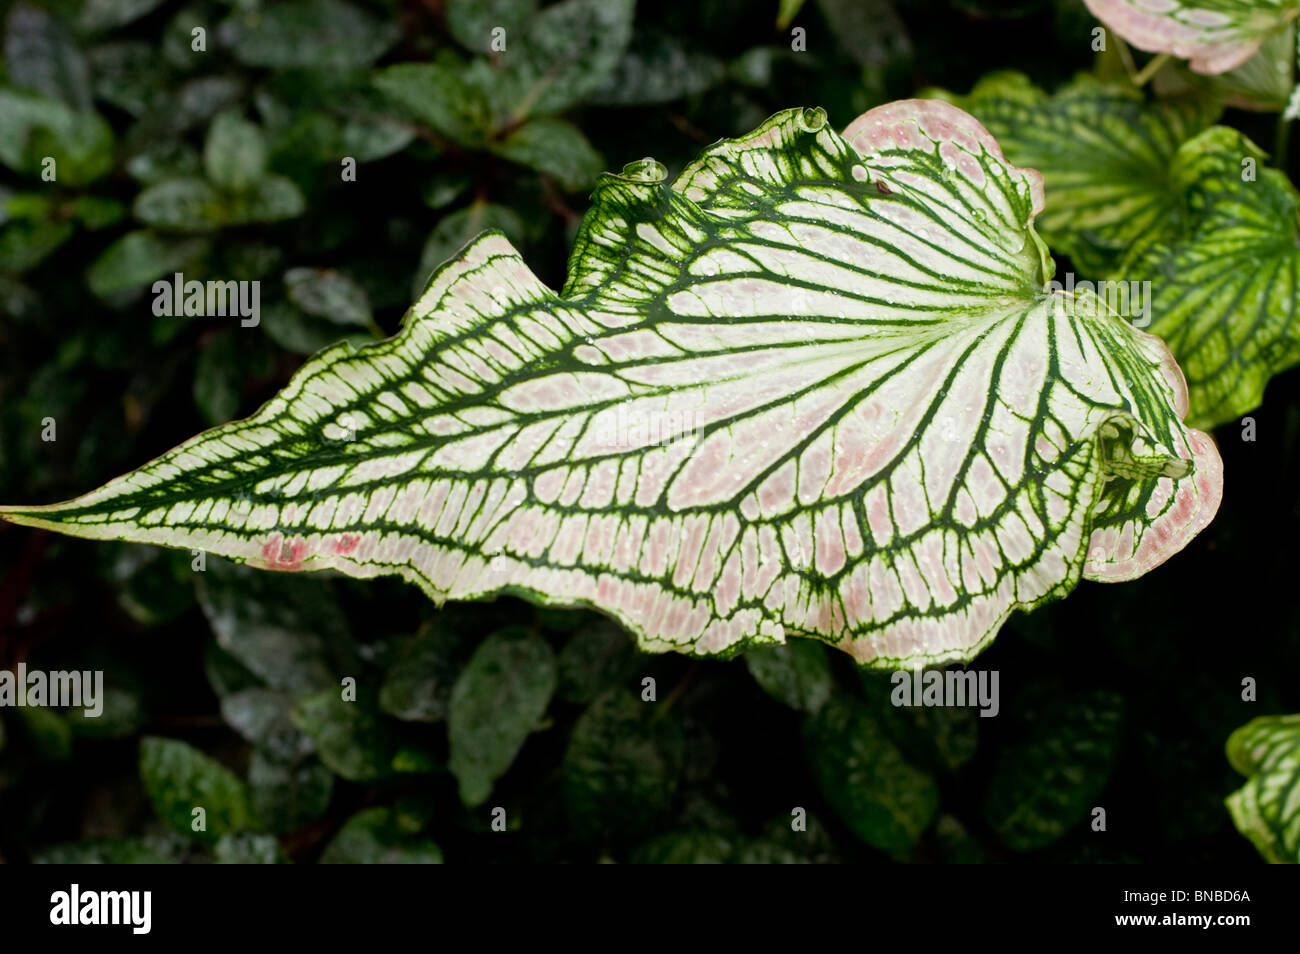 White green and pink leave close up of caladium Stock Photo